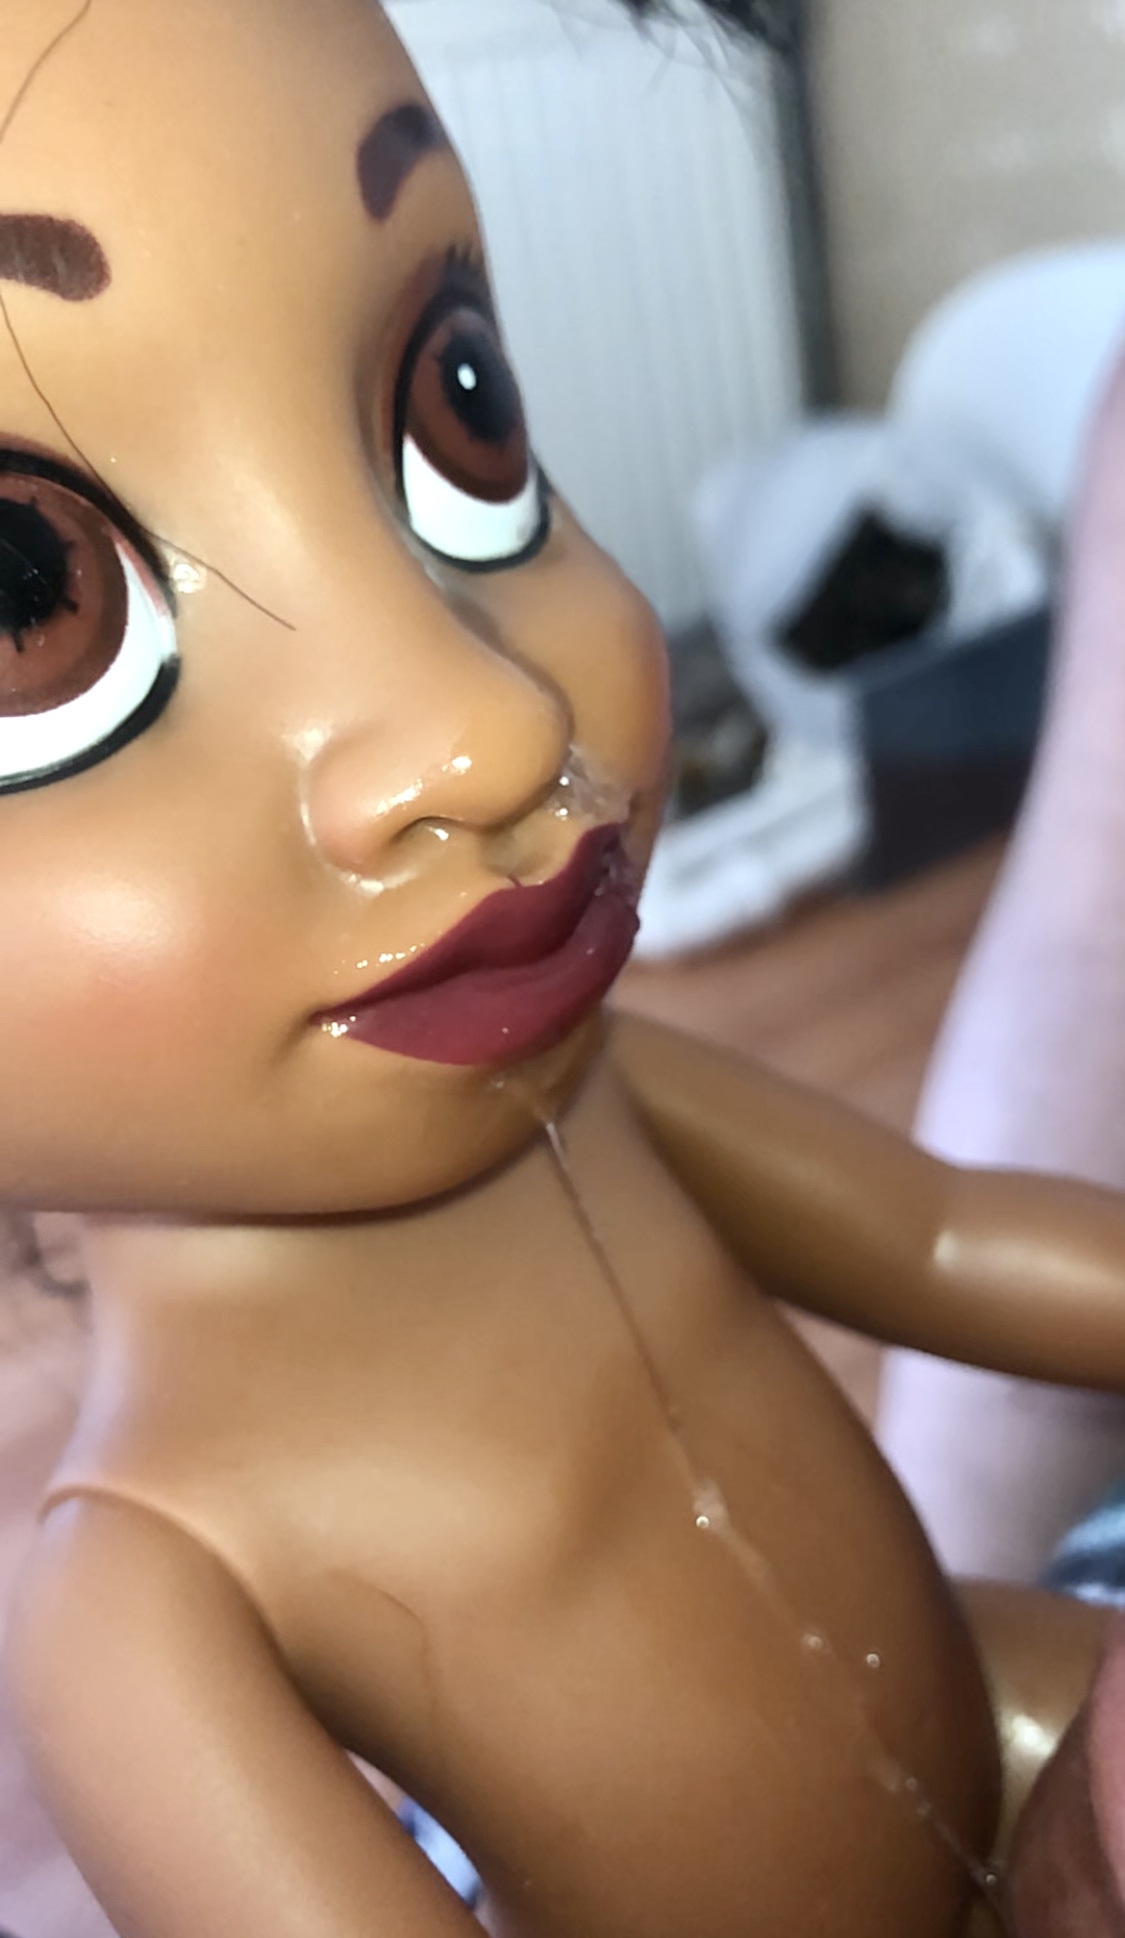 secondhand store doll Precum on face and hand in anus